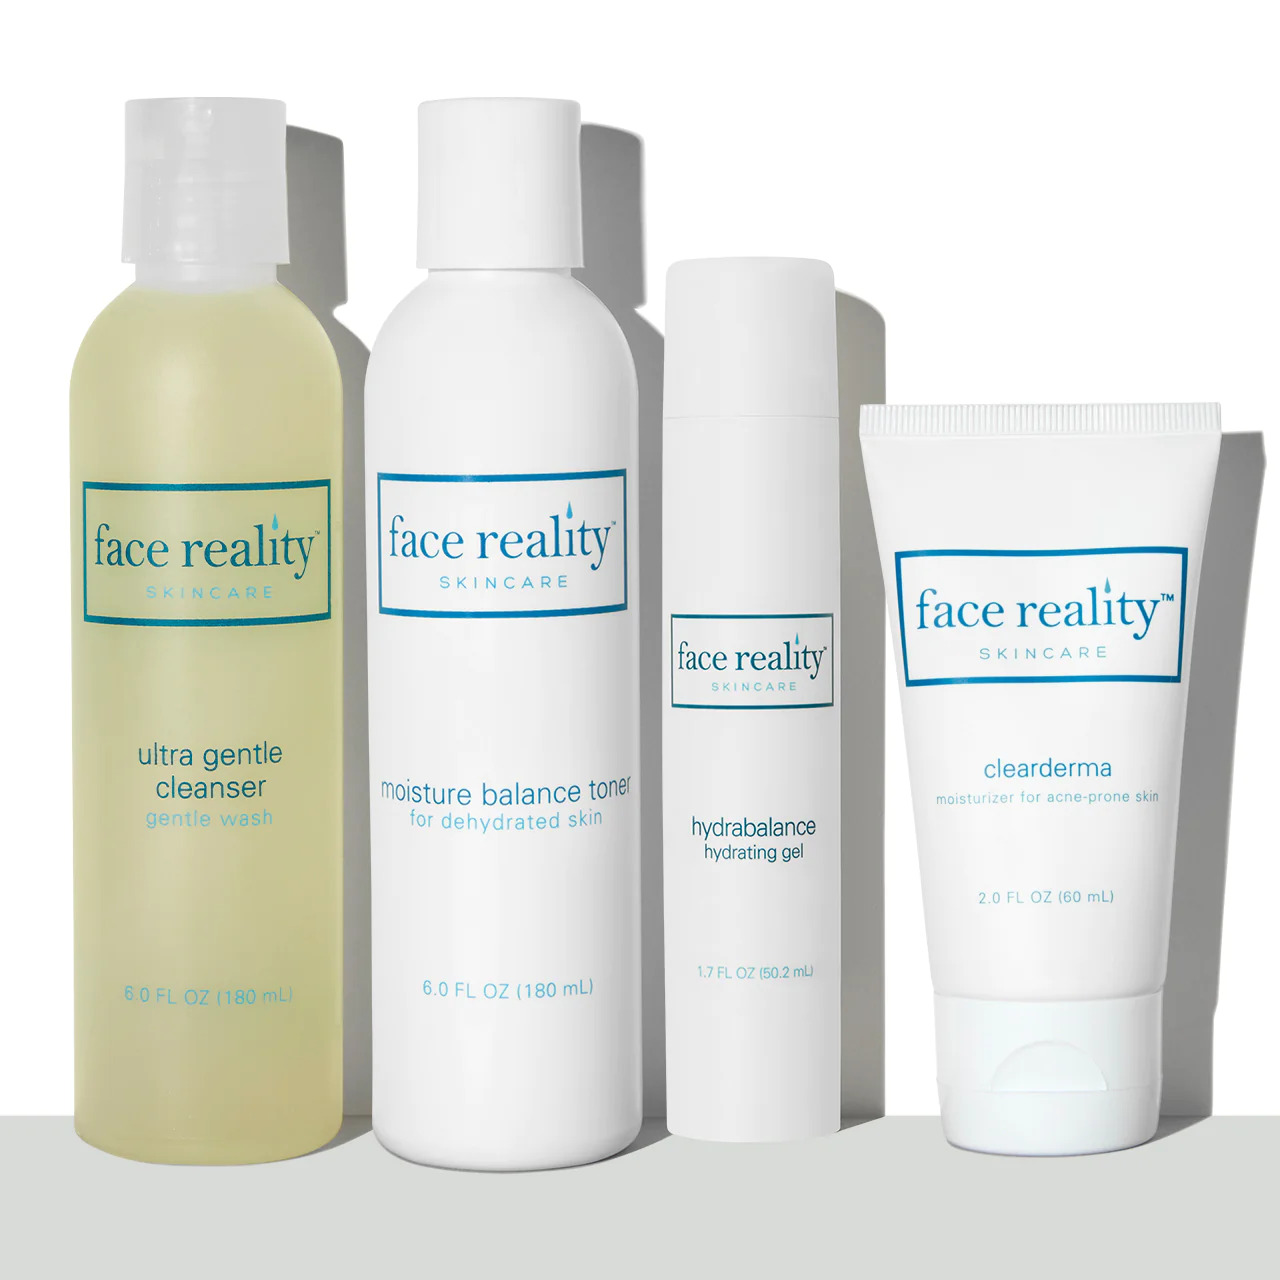 Face Reality® products